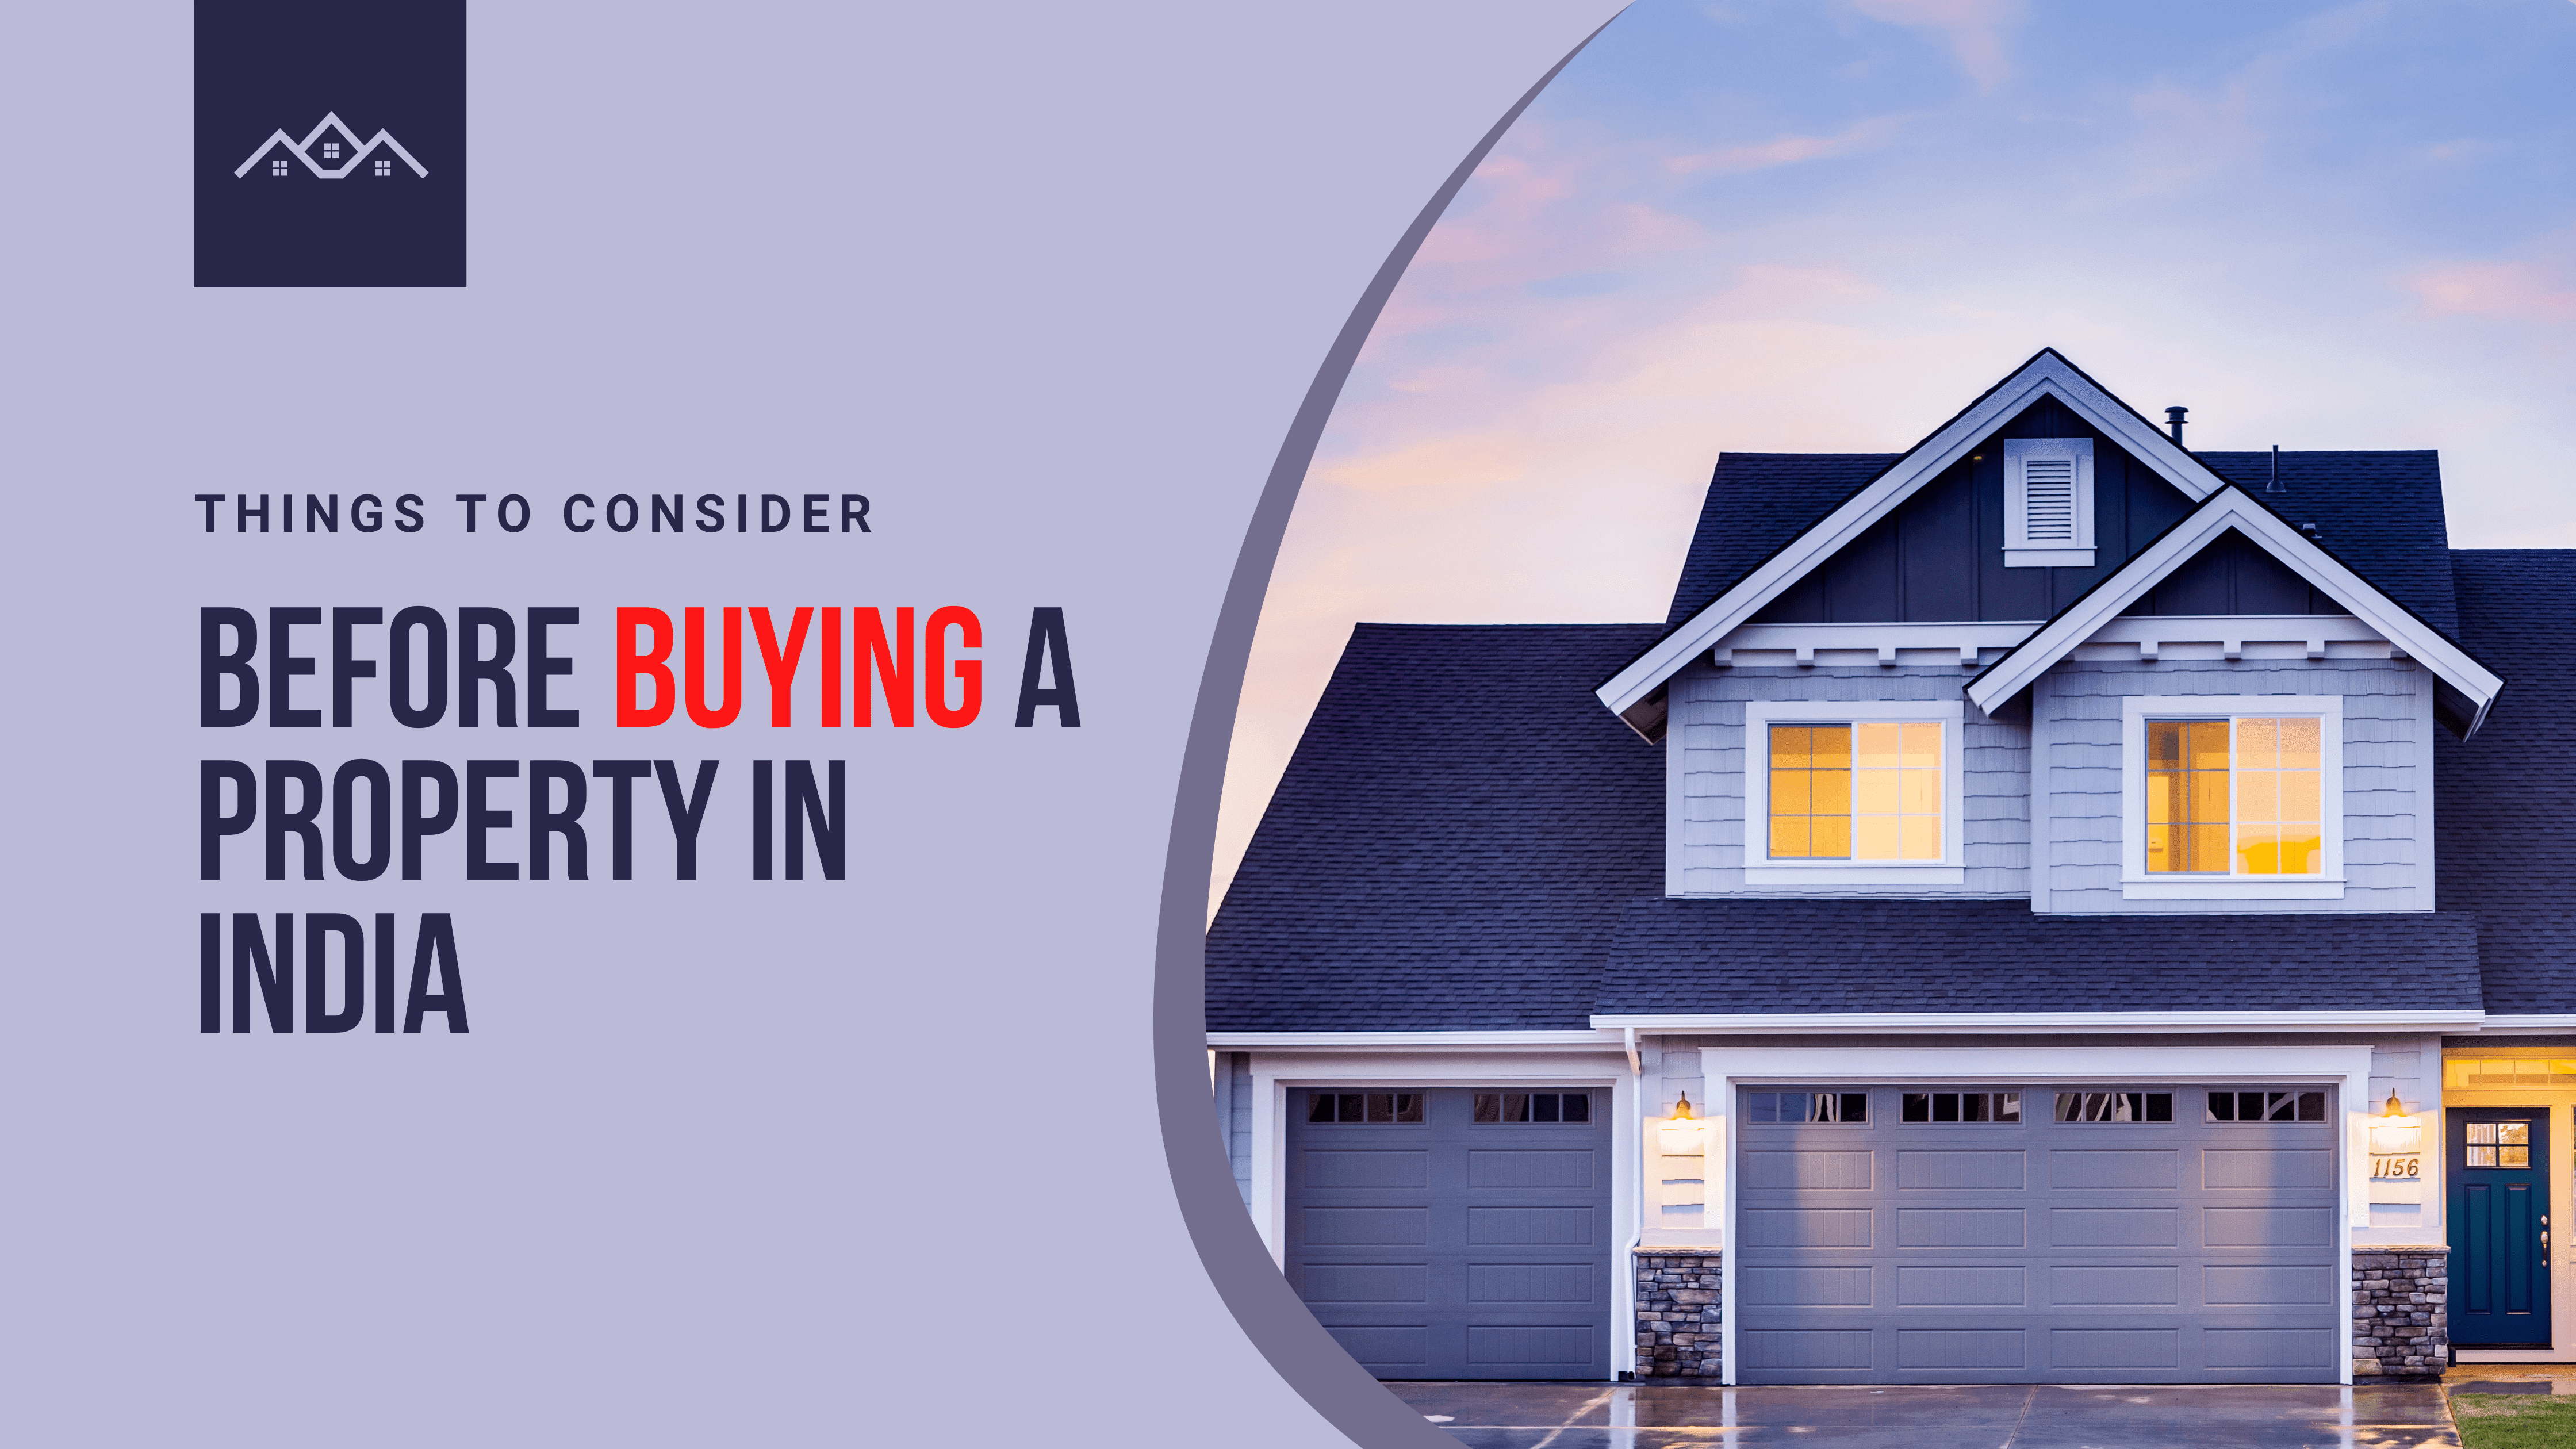 Things to Consider Before Buying a Property in India